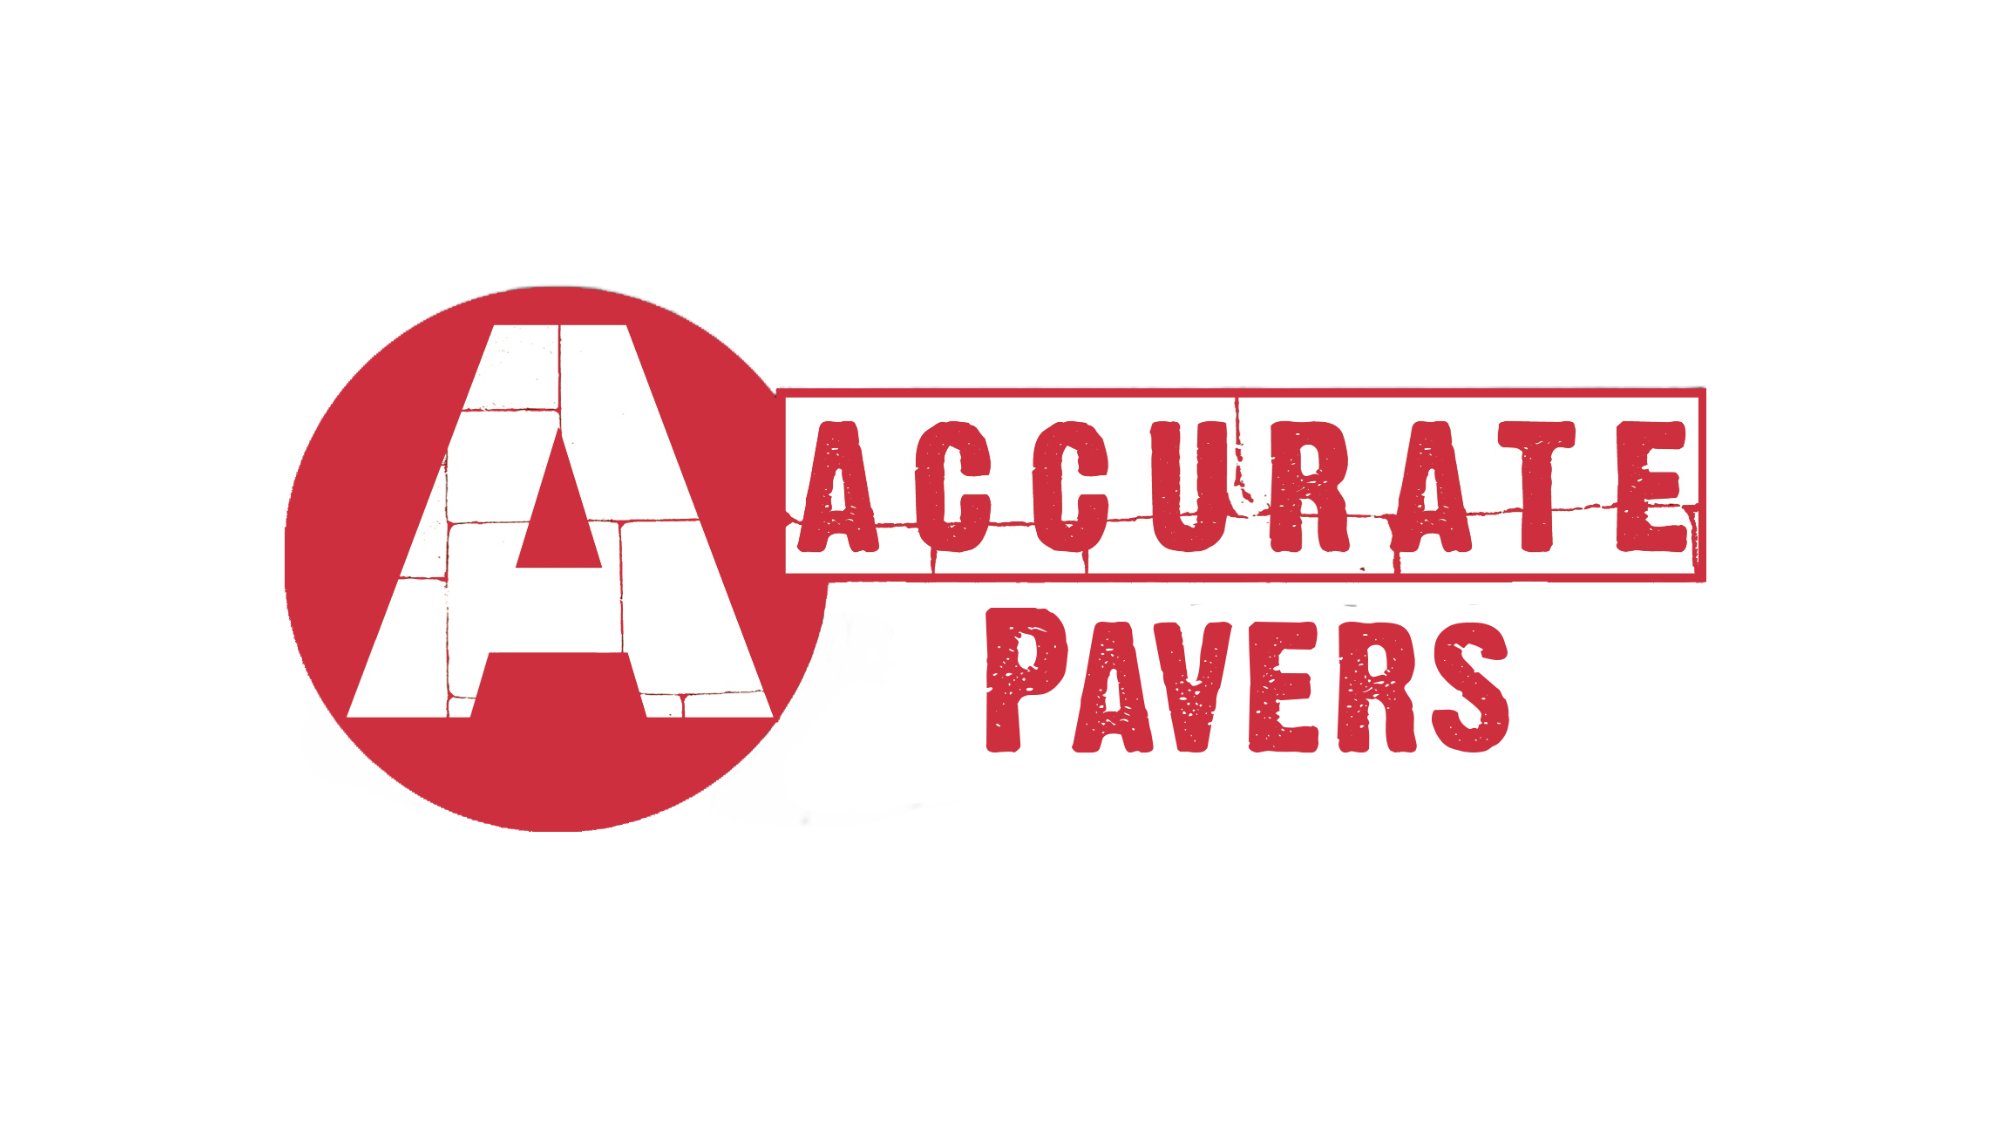 Accurate Pavers Logo